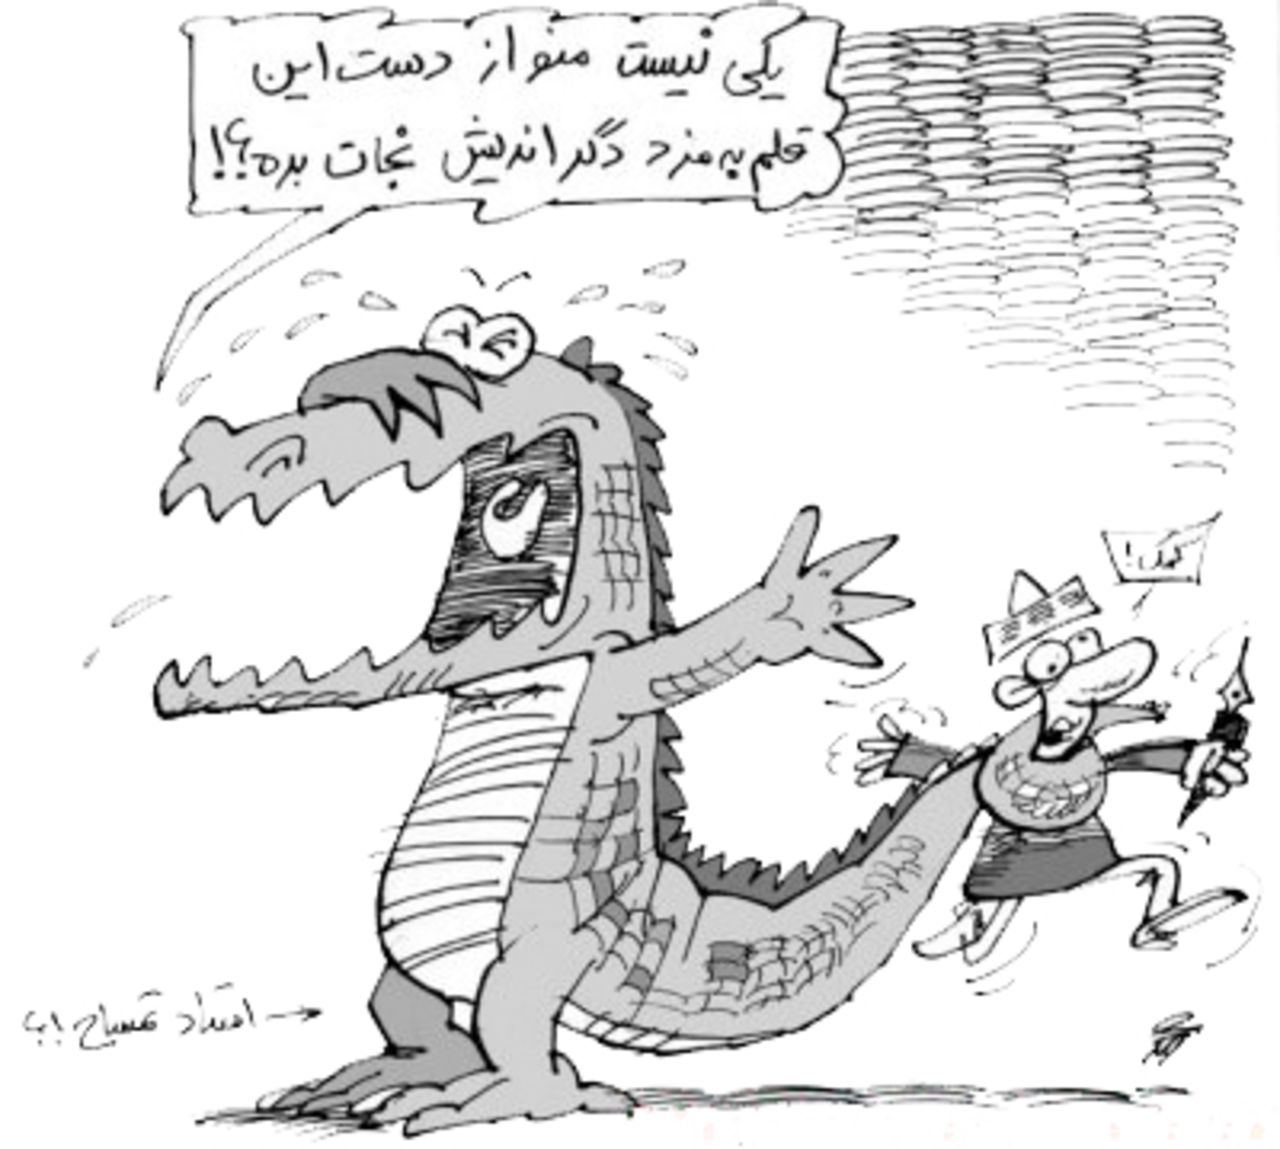 The cartoon that got Kowsar in trouble depicted Ayatollah MJesbah Yazdi, a famous Iranian cleric, as a crocodile squeezing the life out of a journalist with his tail. 